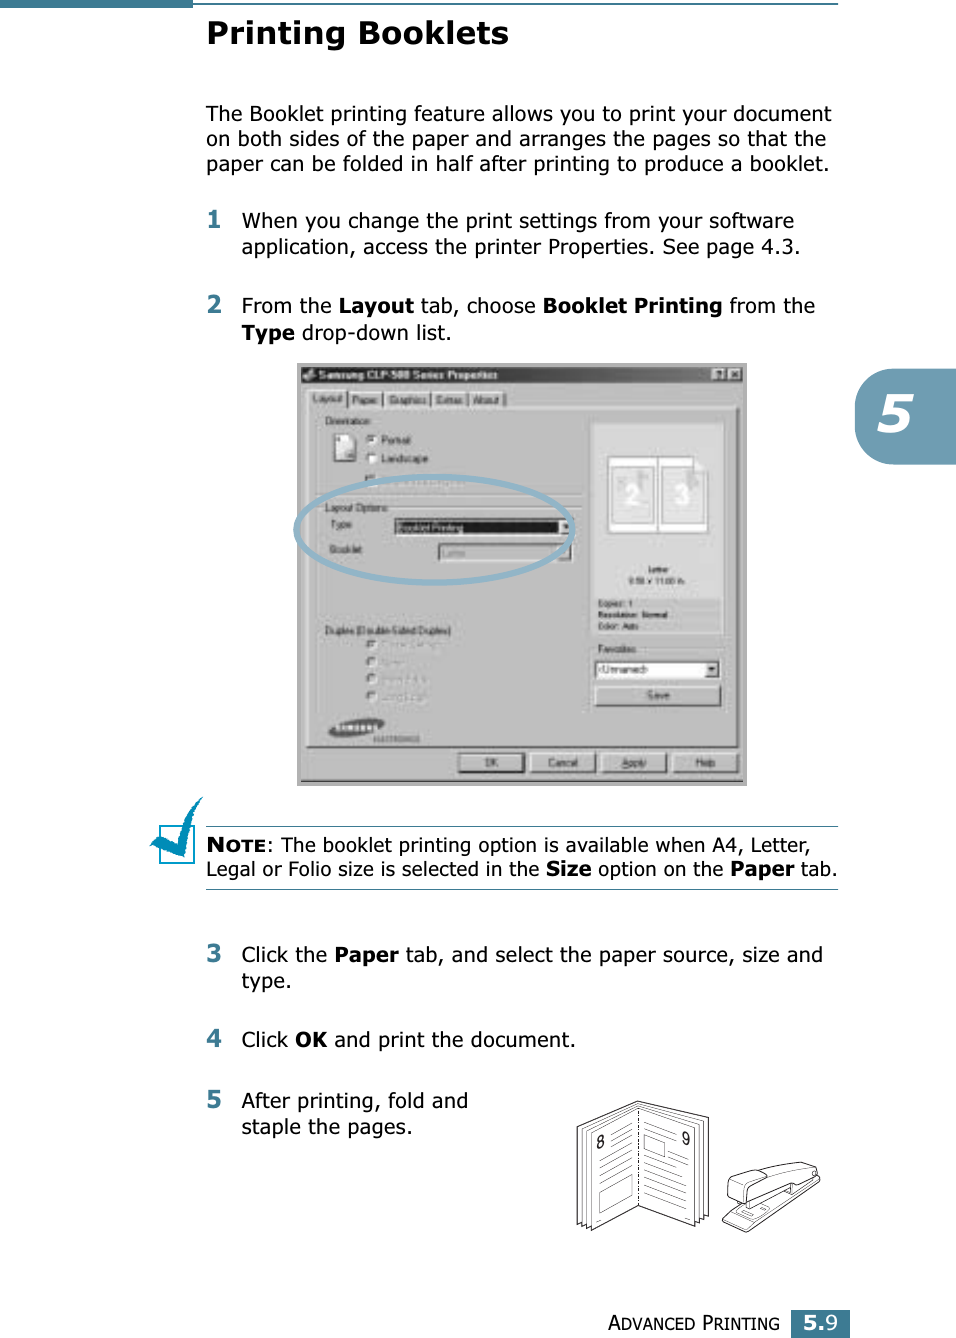 ADVANCED PRINTING5.95Printing BookletsThe Booklet printing feature allows you to print your document on both sides of the paper and arranges the pages so that the paper can be folded in half after printing to produce a booklet. 1When you change the print settings from your software application, access the printer Properties. See page 4.3.2From the Layout tab, choose Booklet Printing from the Type drop-down list. NOTE: The booklet printing option is available when A4, Letter, Legal or Folio size is selected in the Size option on the Paper tab.3Click the Paper tab, and select the paper source, size and type.4Click OK and print the document.5After printing, fold and staple the pages. 89